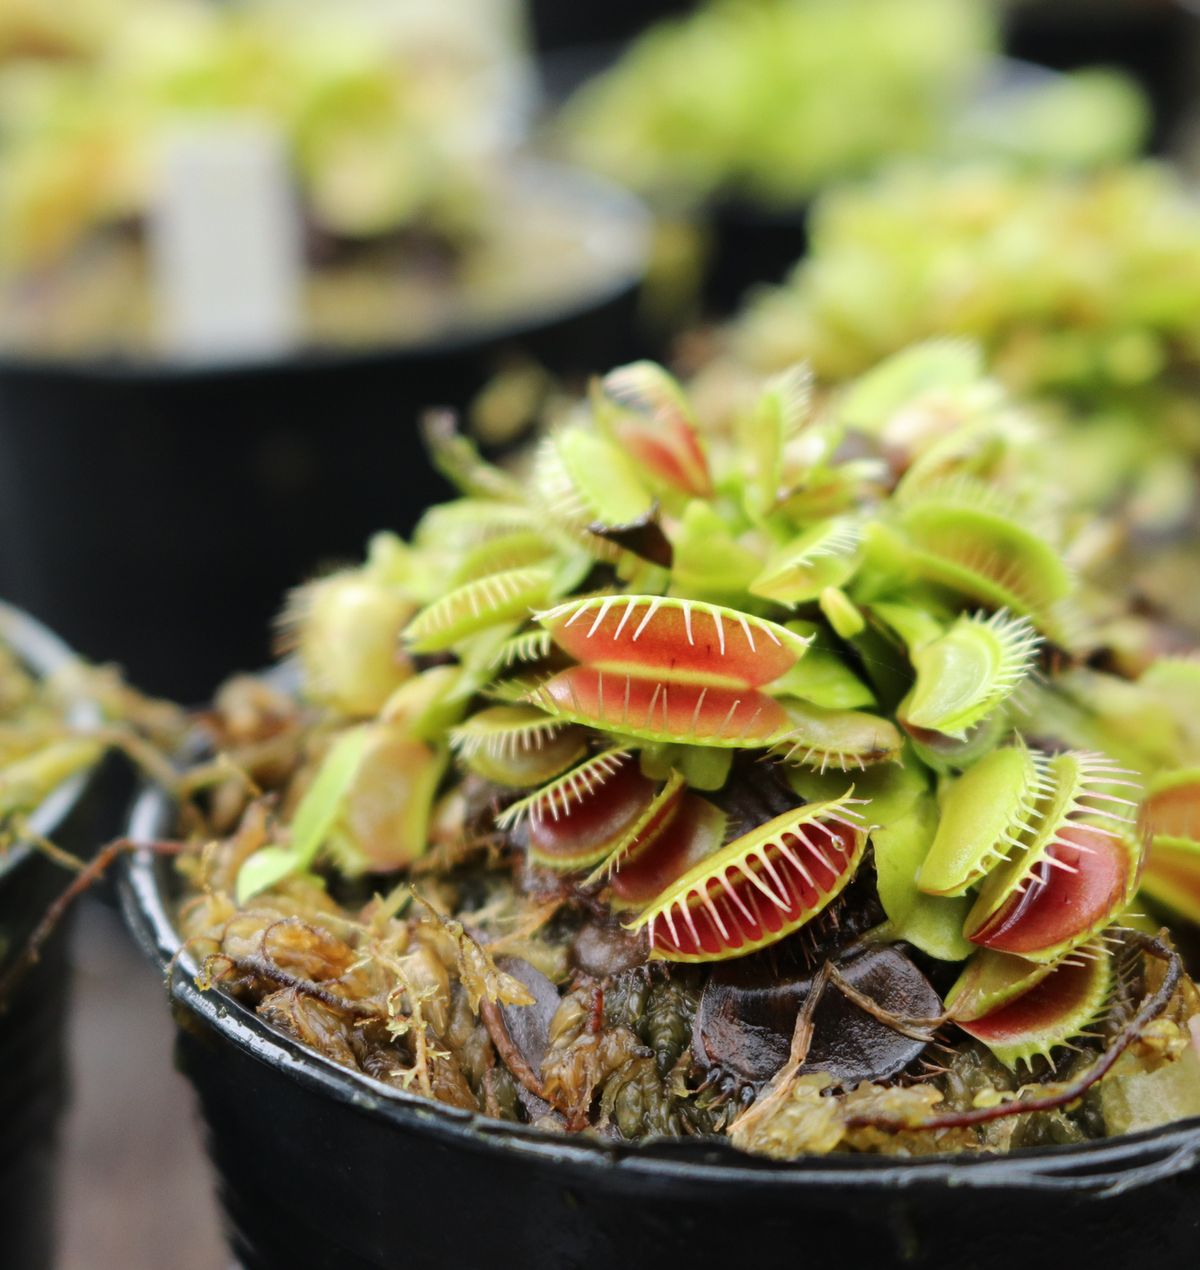 How to Care for Venus Flytraps Indoors